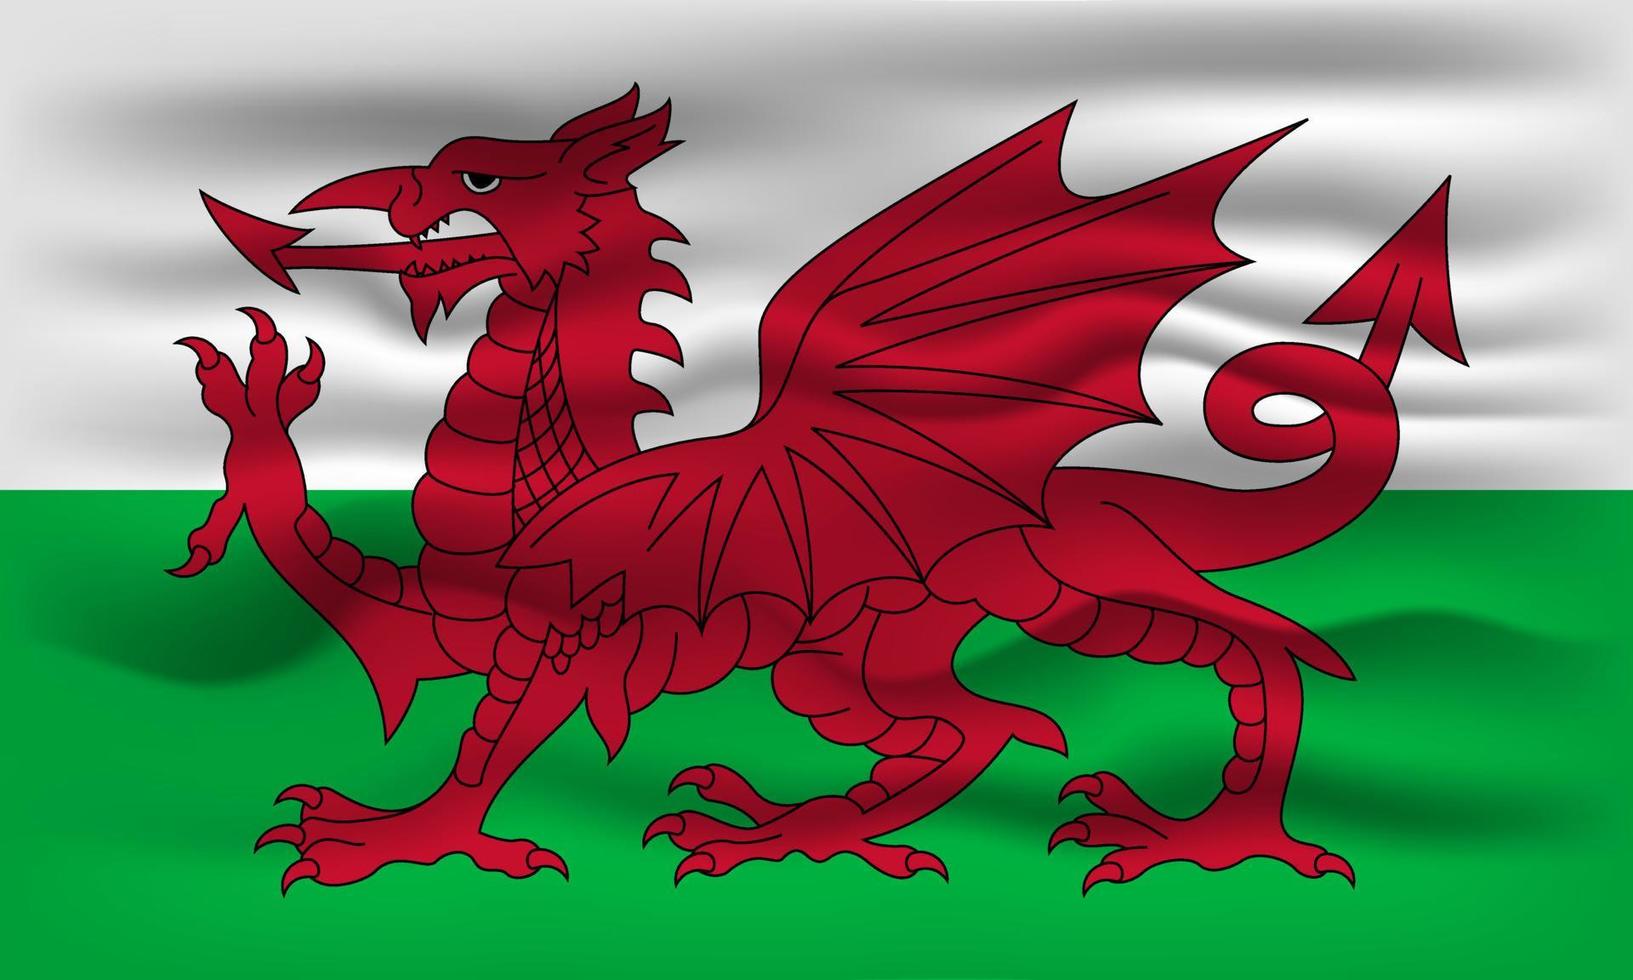 Waving flag of the country Wales. Vector illustration.